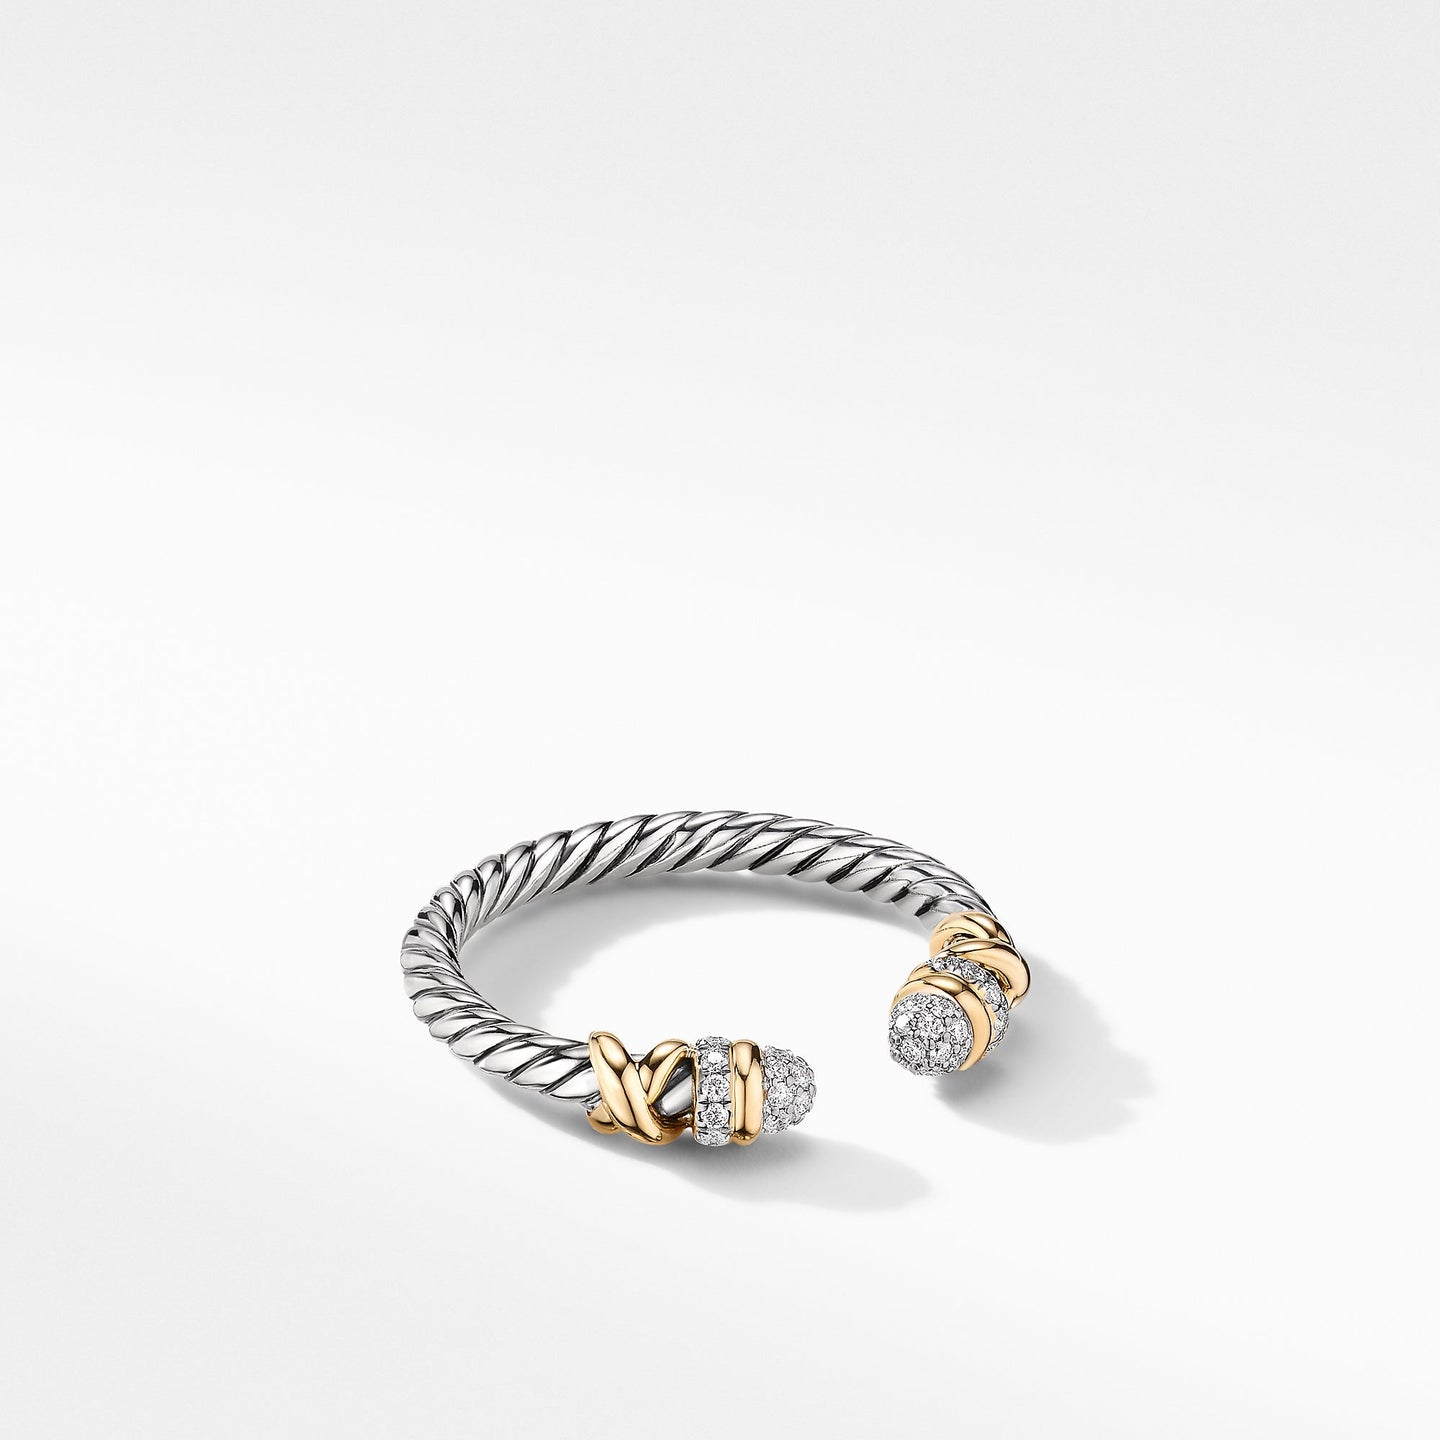 Petite Helena Open Ring with 18K Yellow Gold and Diamonds, Size 7